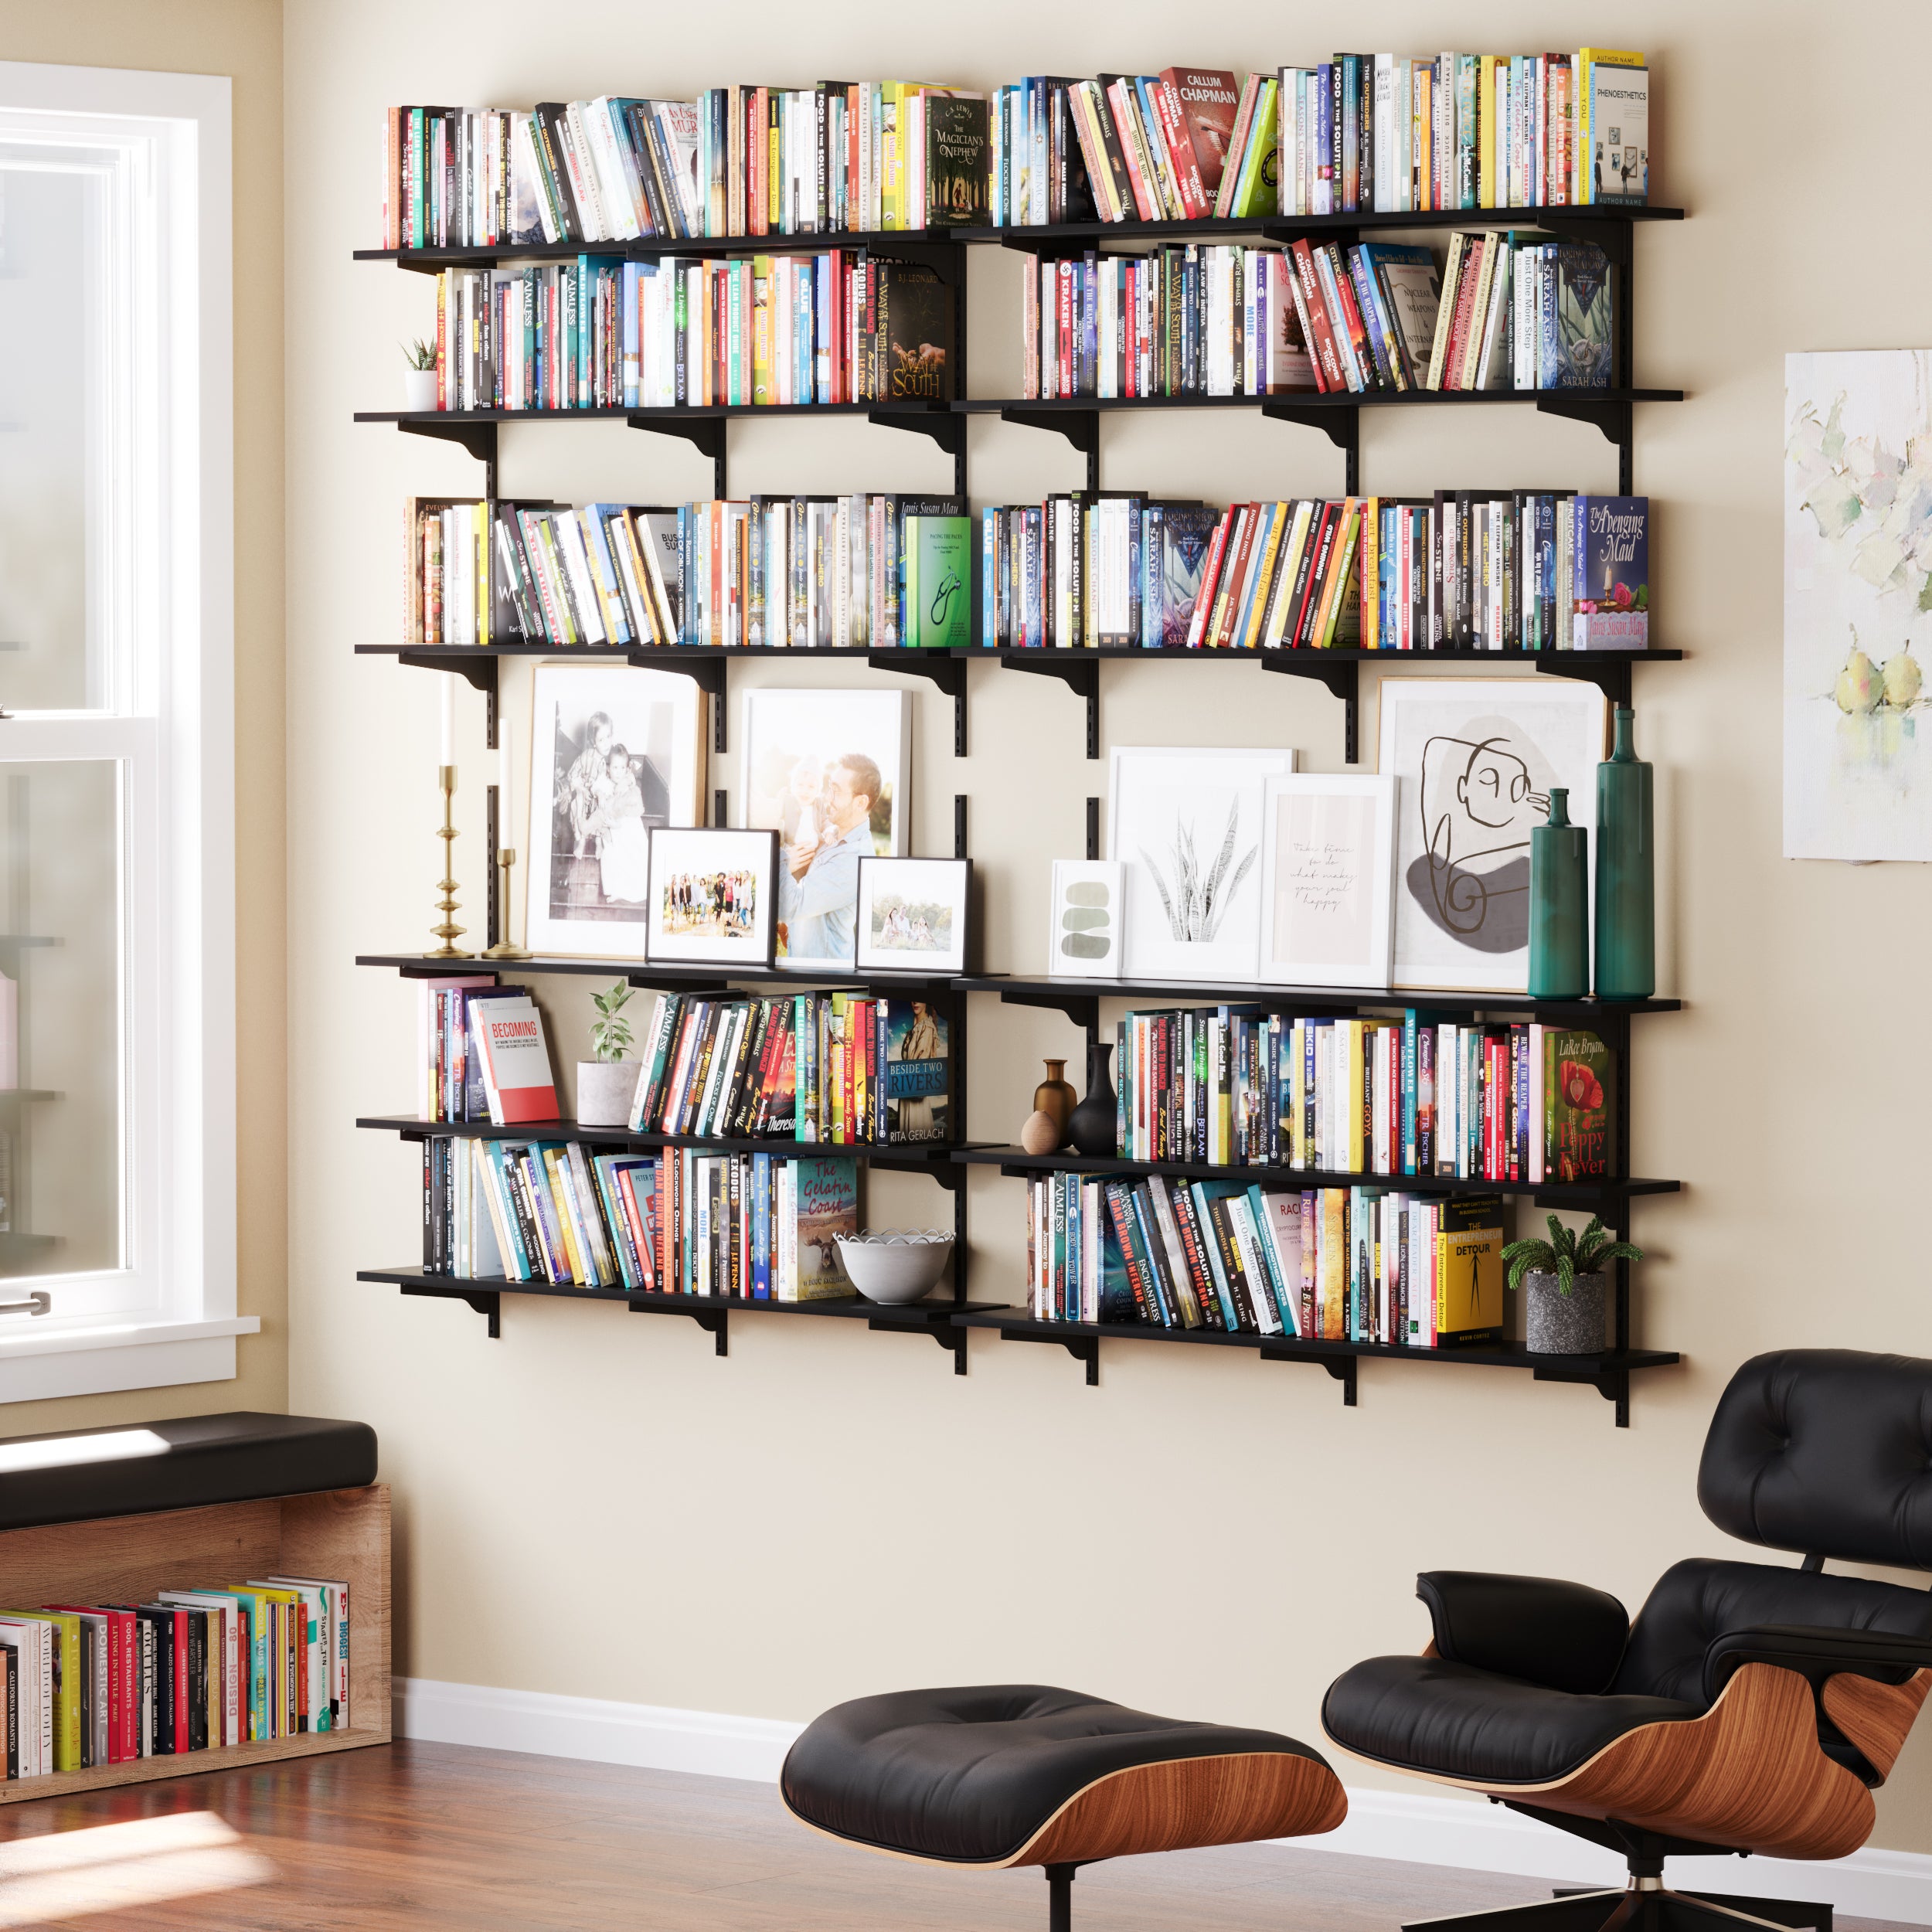 A cozy reading area with black floating shelves on a wall full of colorfully spined books and personal decor items.